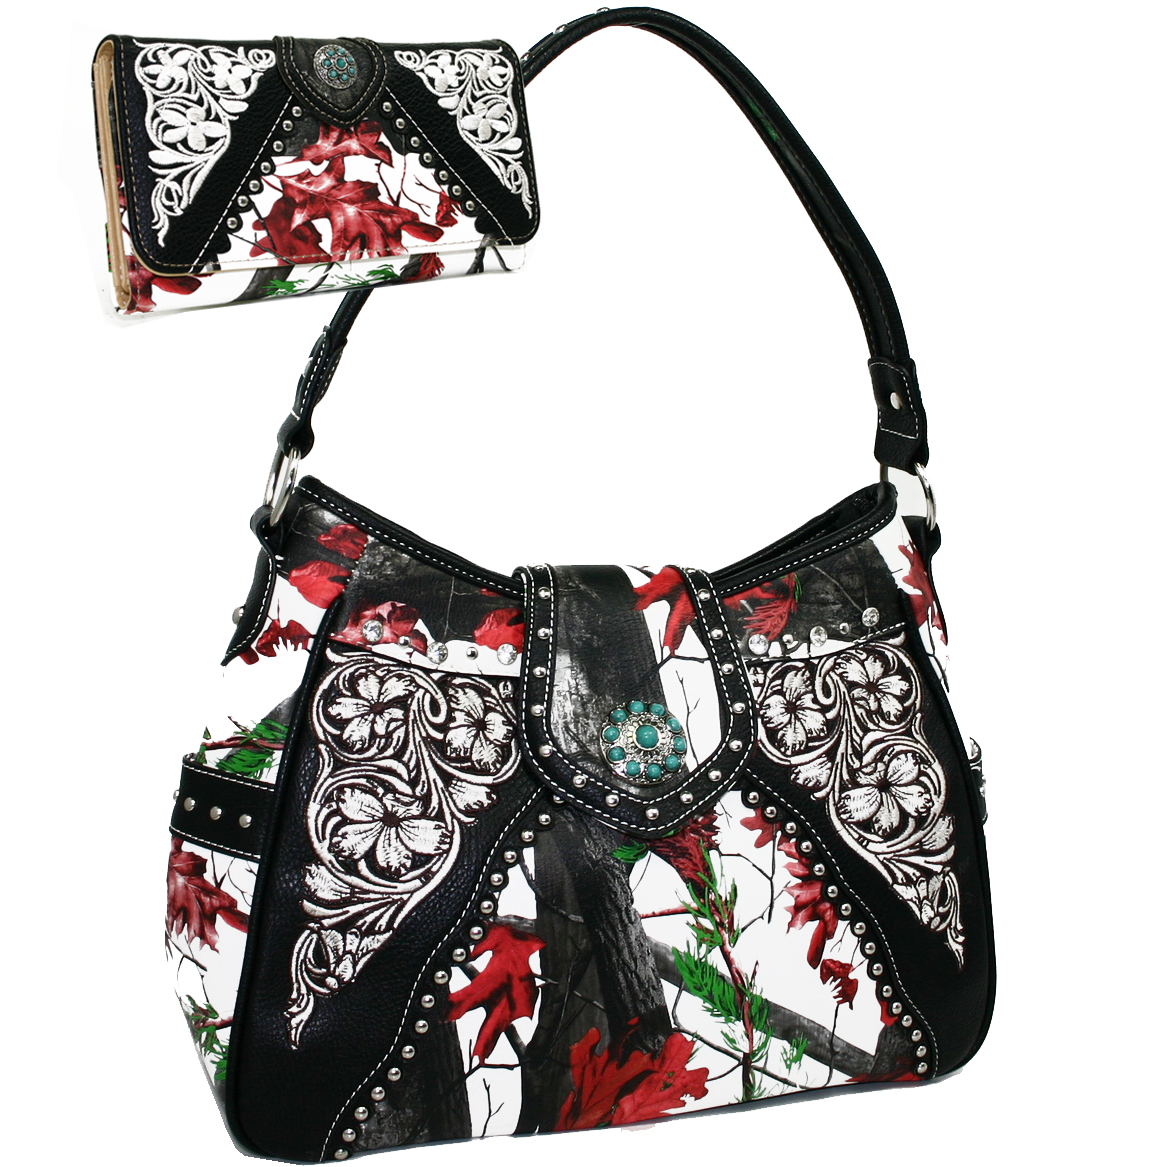 Bt923set-rd - Mul Western Turquoise Concho Accented Handbag Purse With Matching Wallet - Red & Multi Color